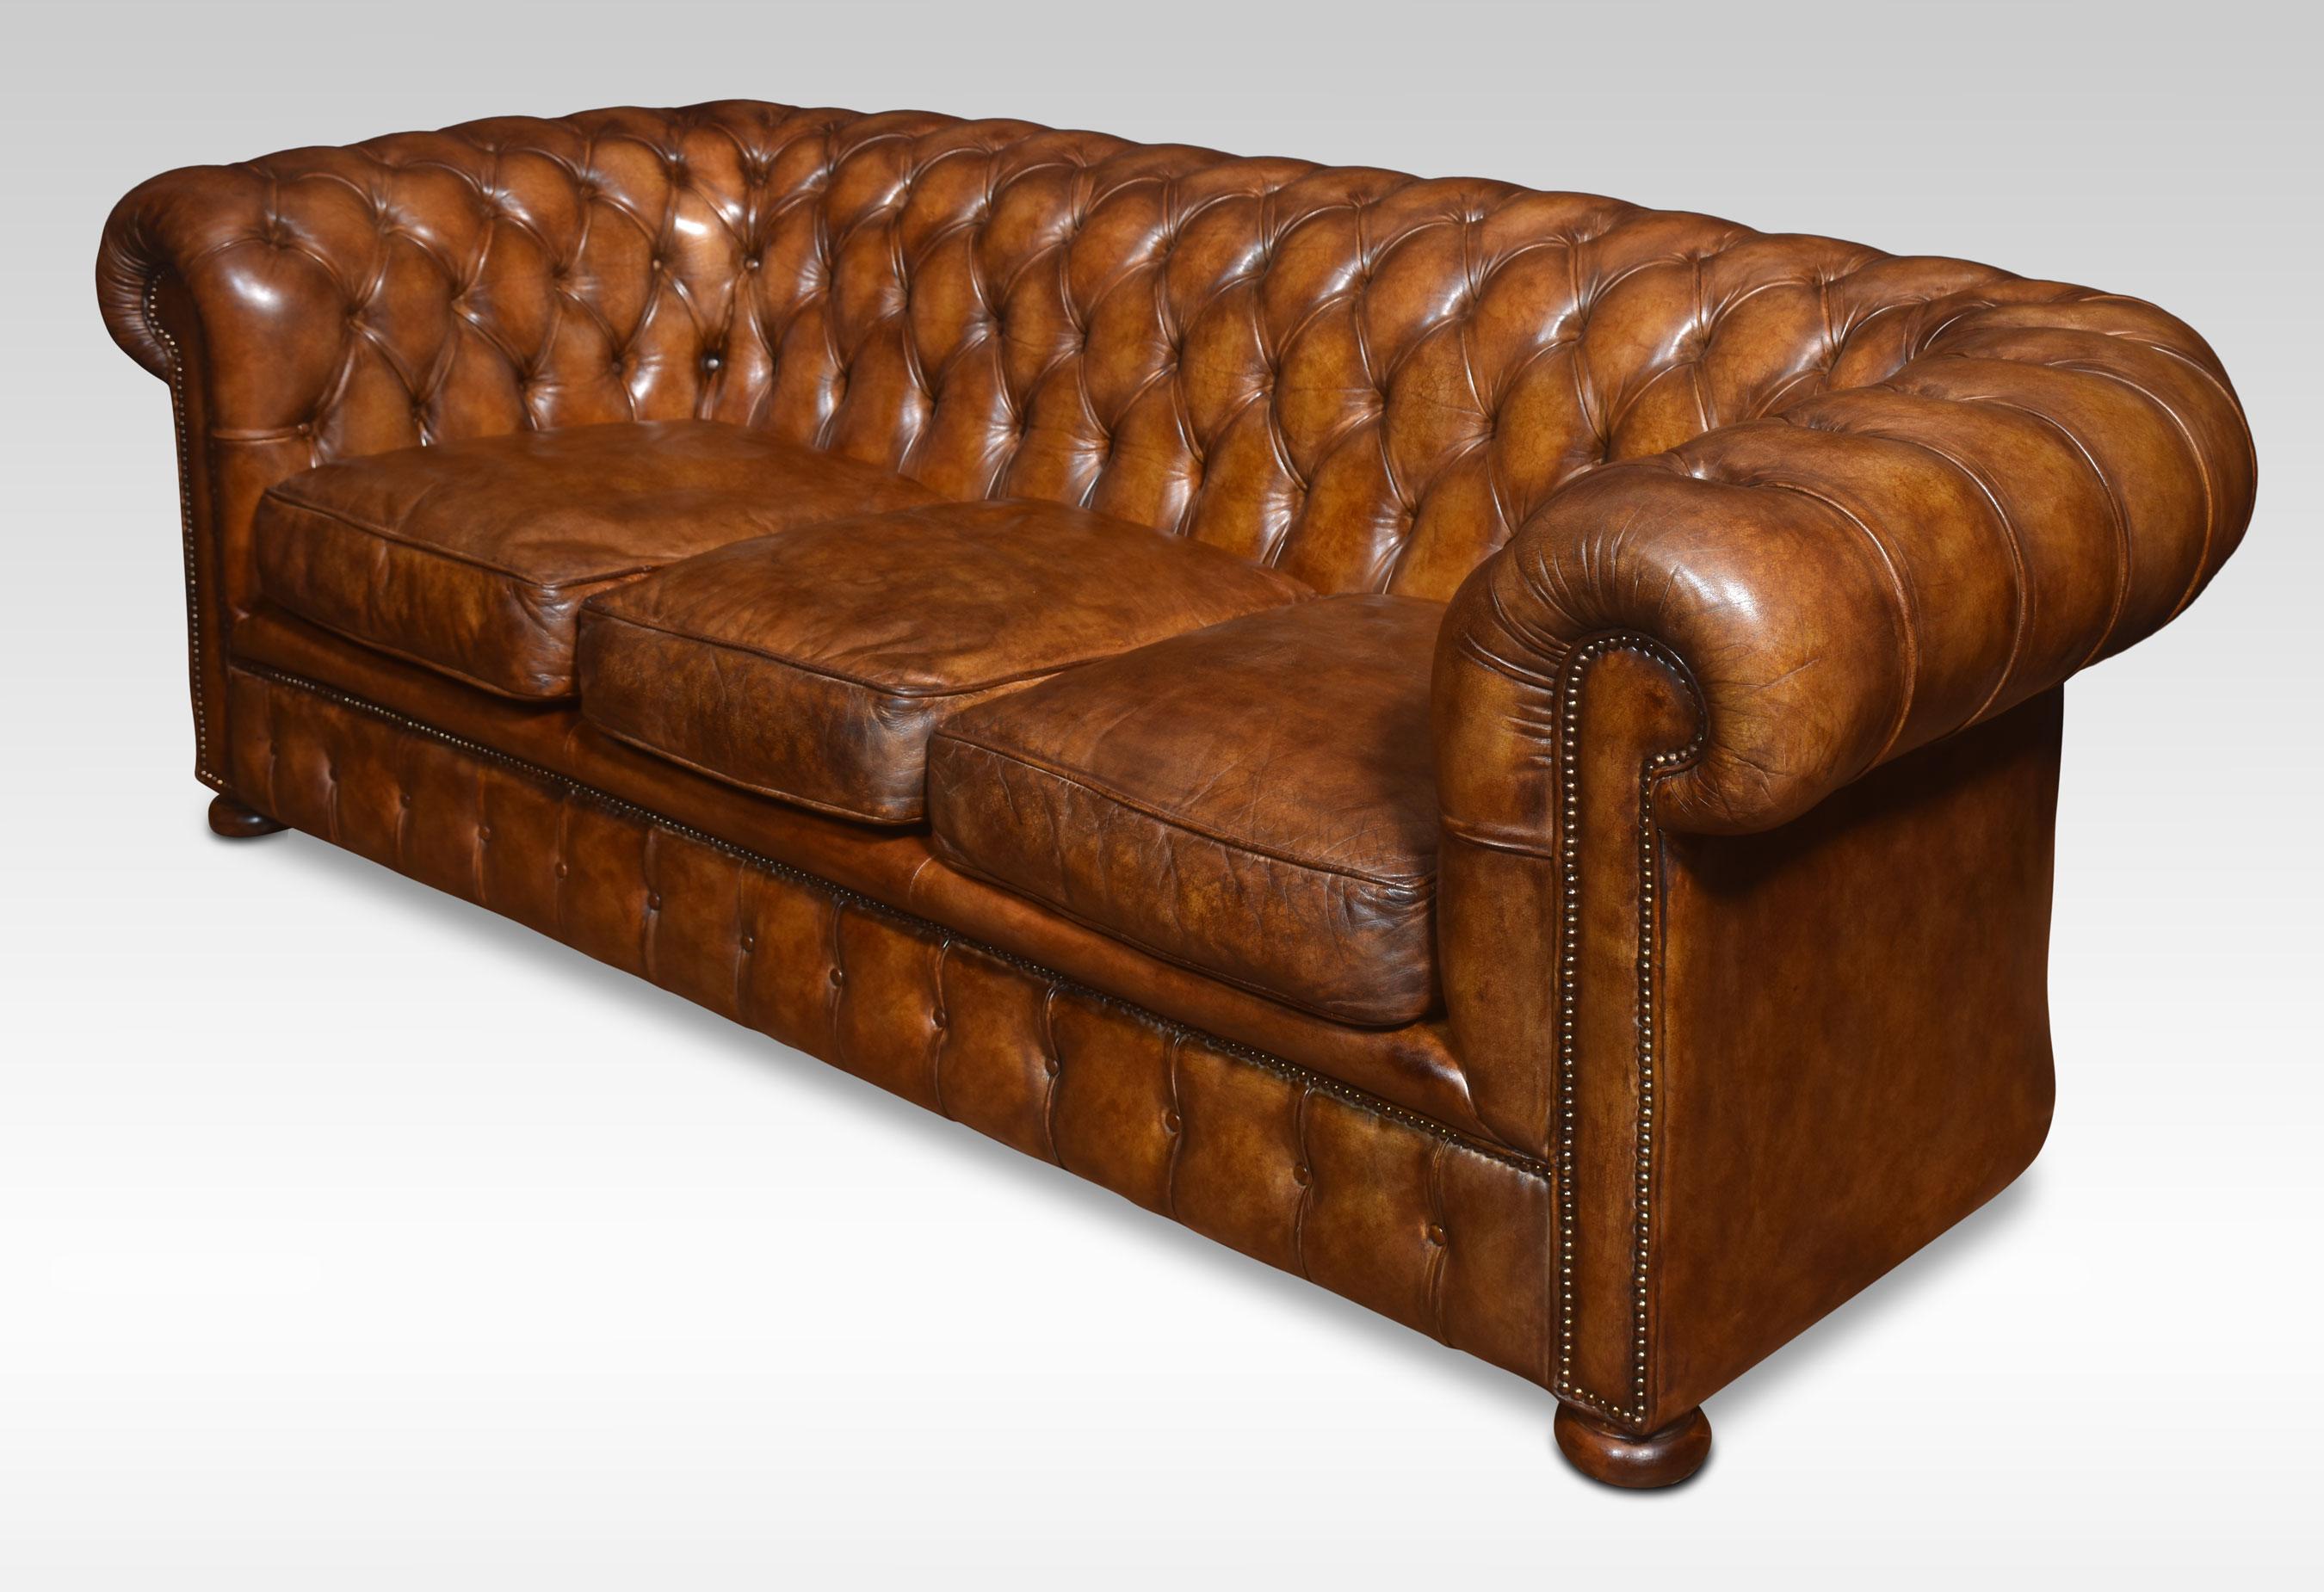 Large brown leather Chesterfield sofa, having deep buttoned back, arms and removable cushions. All raised up on turned feet. Good solid condition, and the leather is soft, and nicely worn in.
Dimensions
Height 30.5 Inches height to seat 19